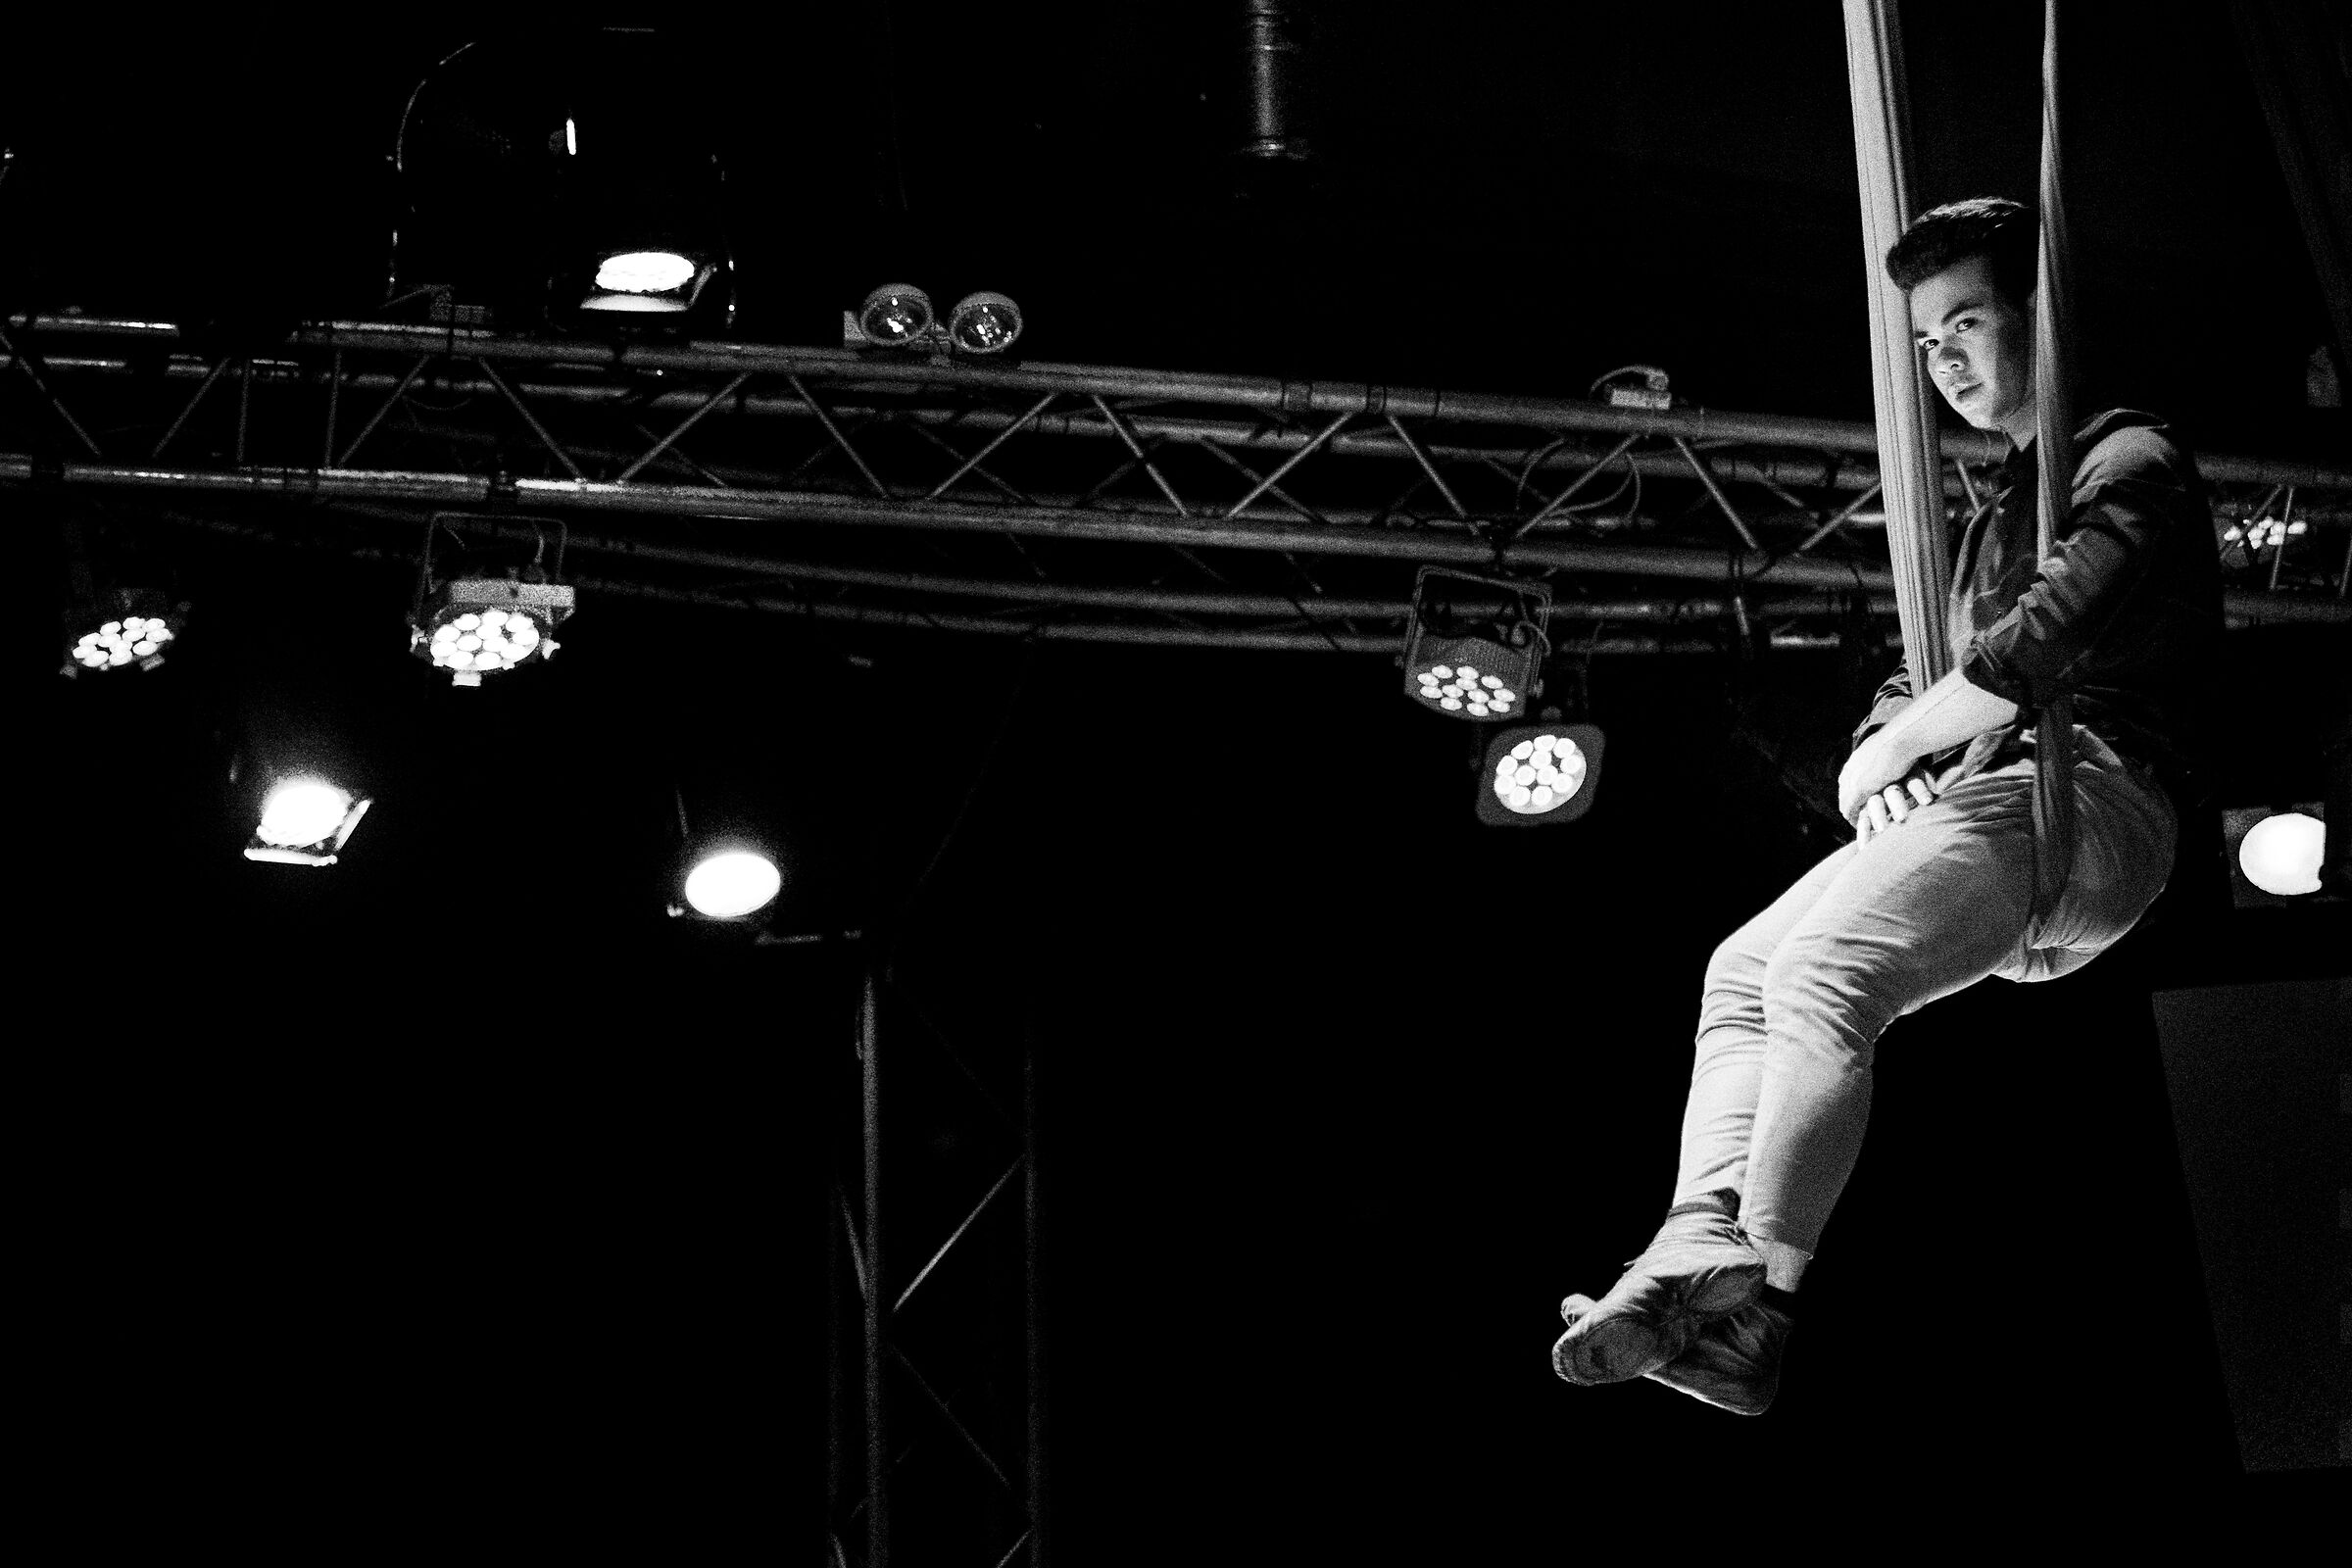 Phare, the cambodian circus...